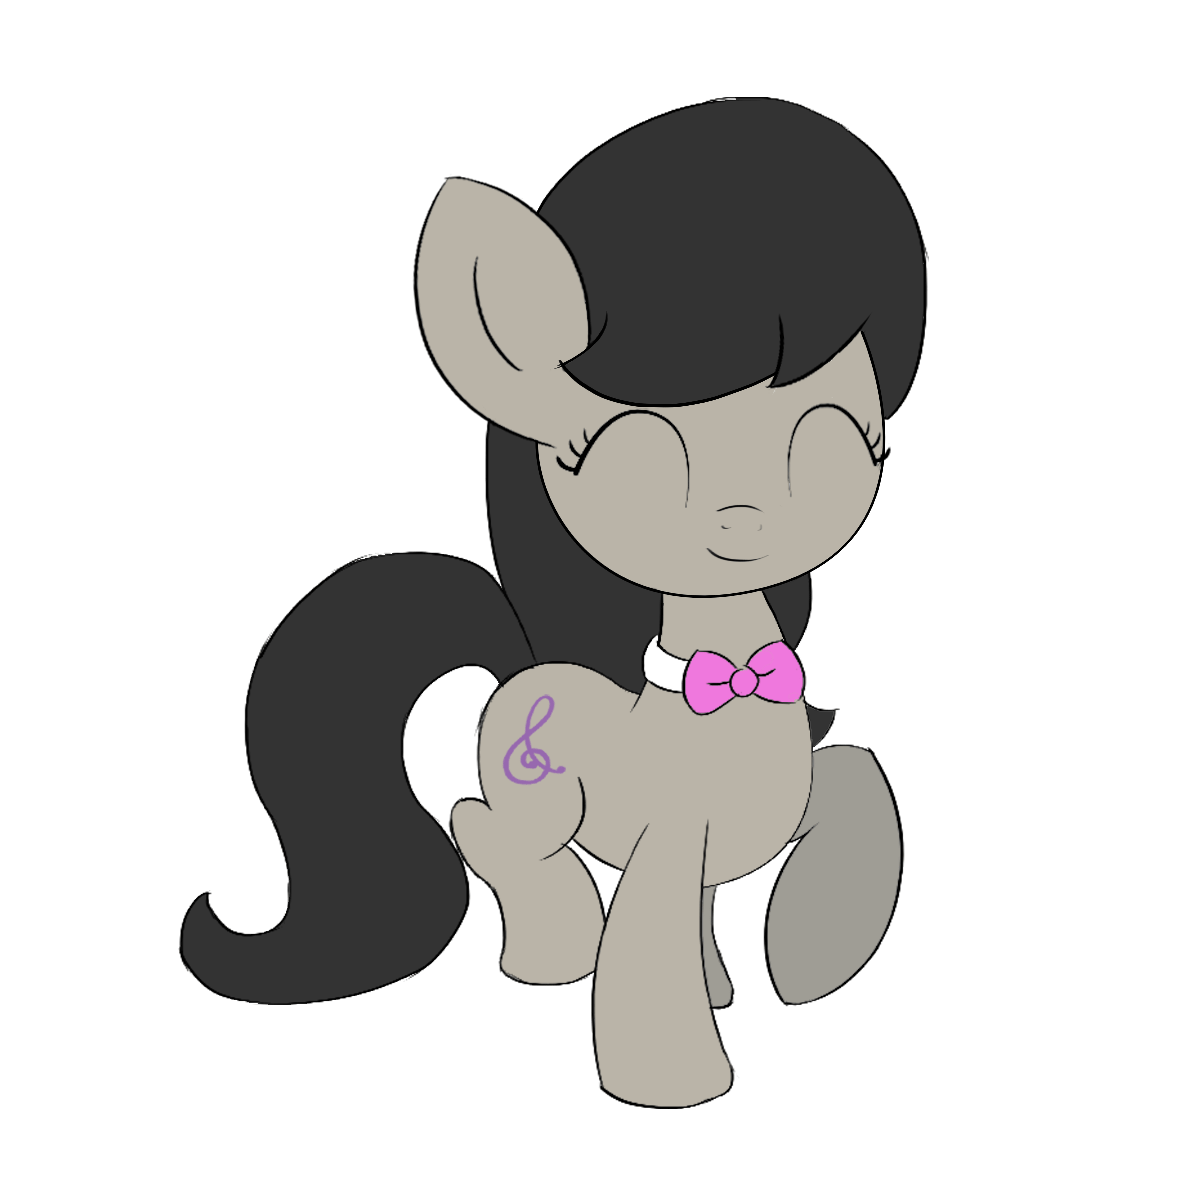 Giddy up! Octavia Gif without background by Bugplayer